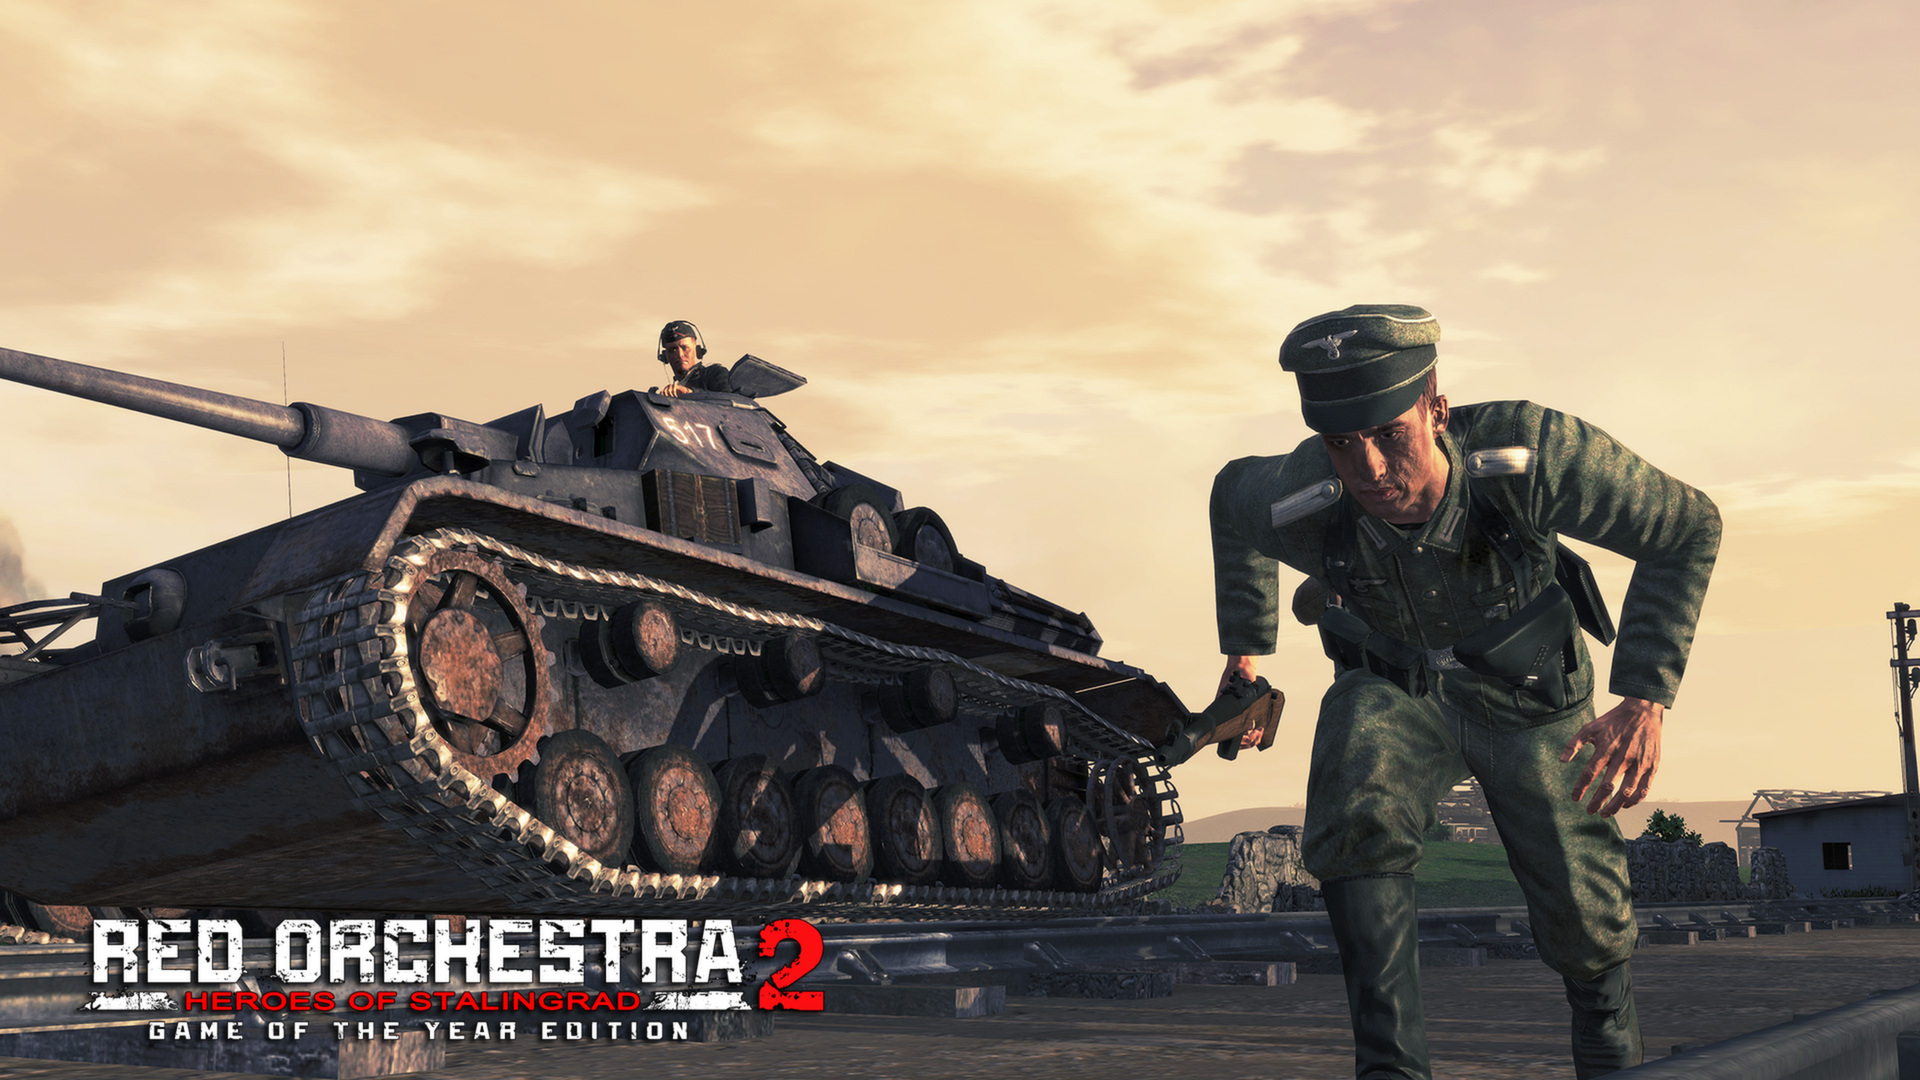 red orchestra 2 heroes of stalingrad system release date